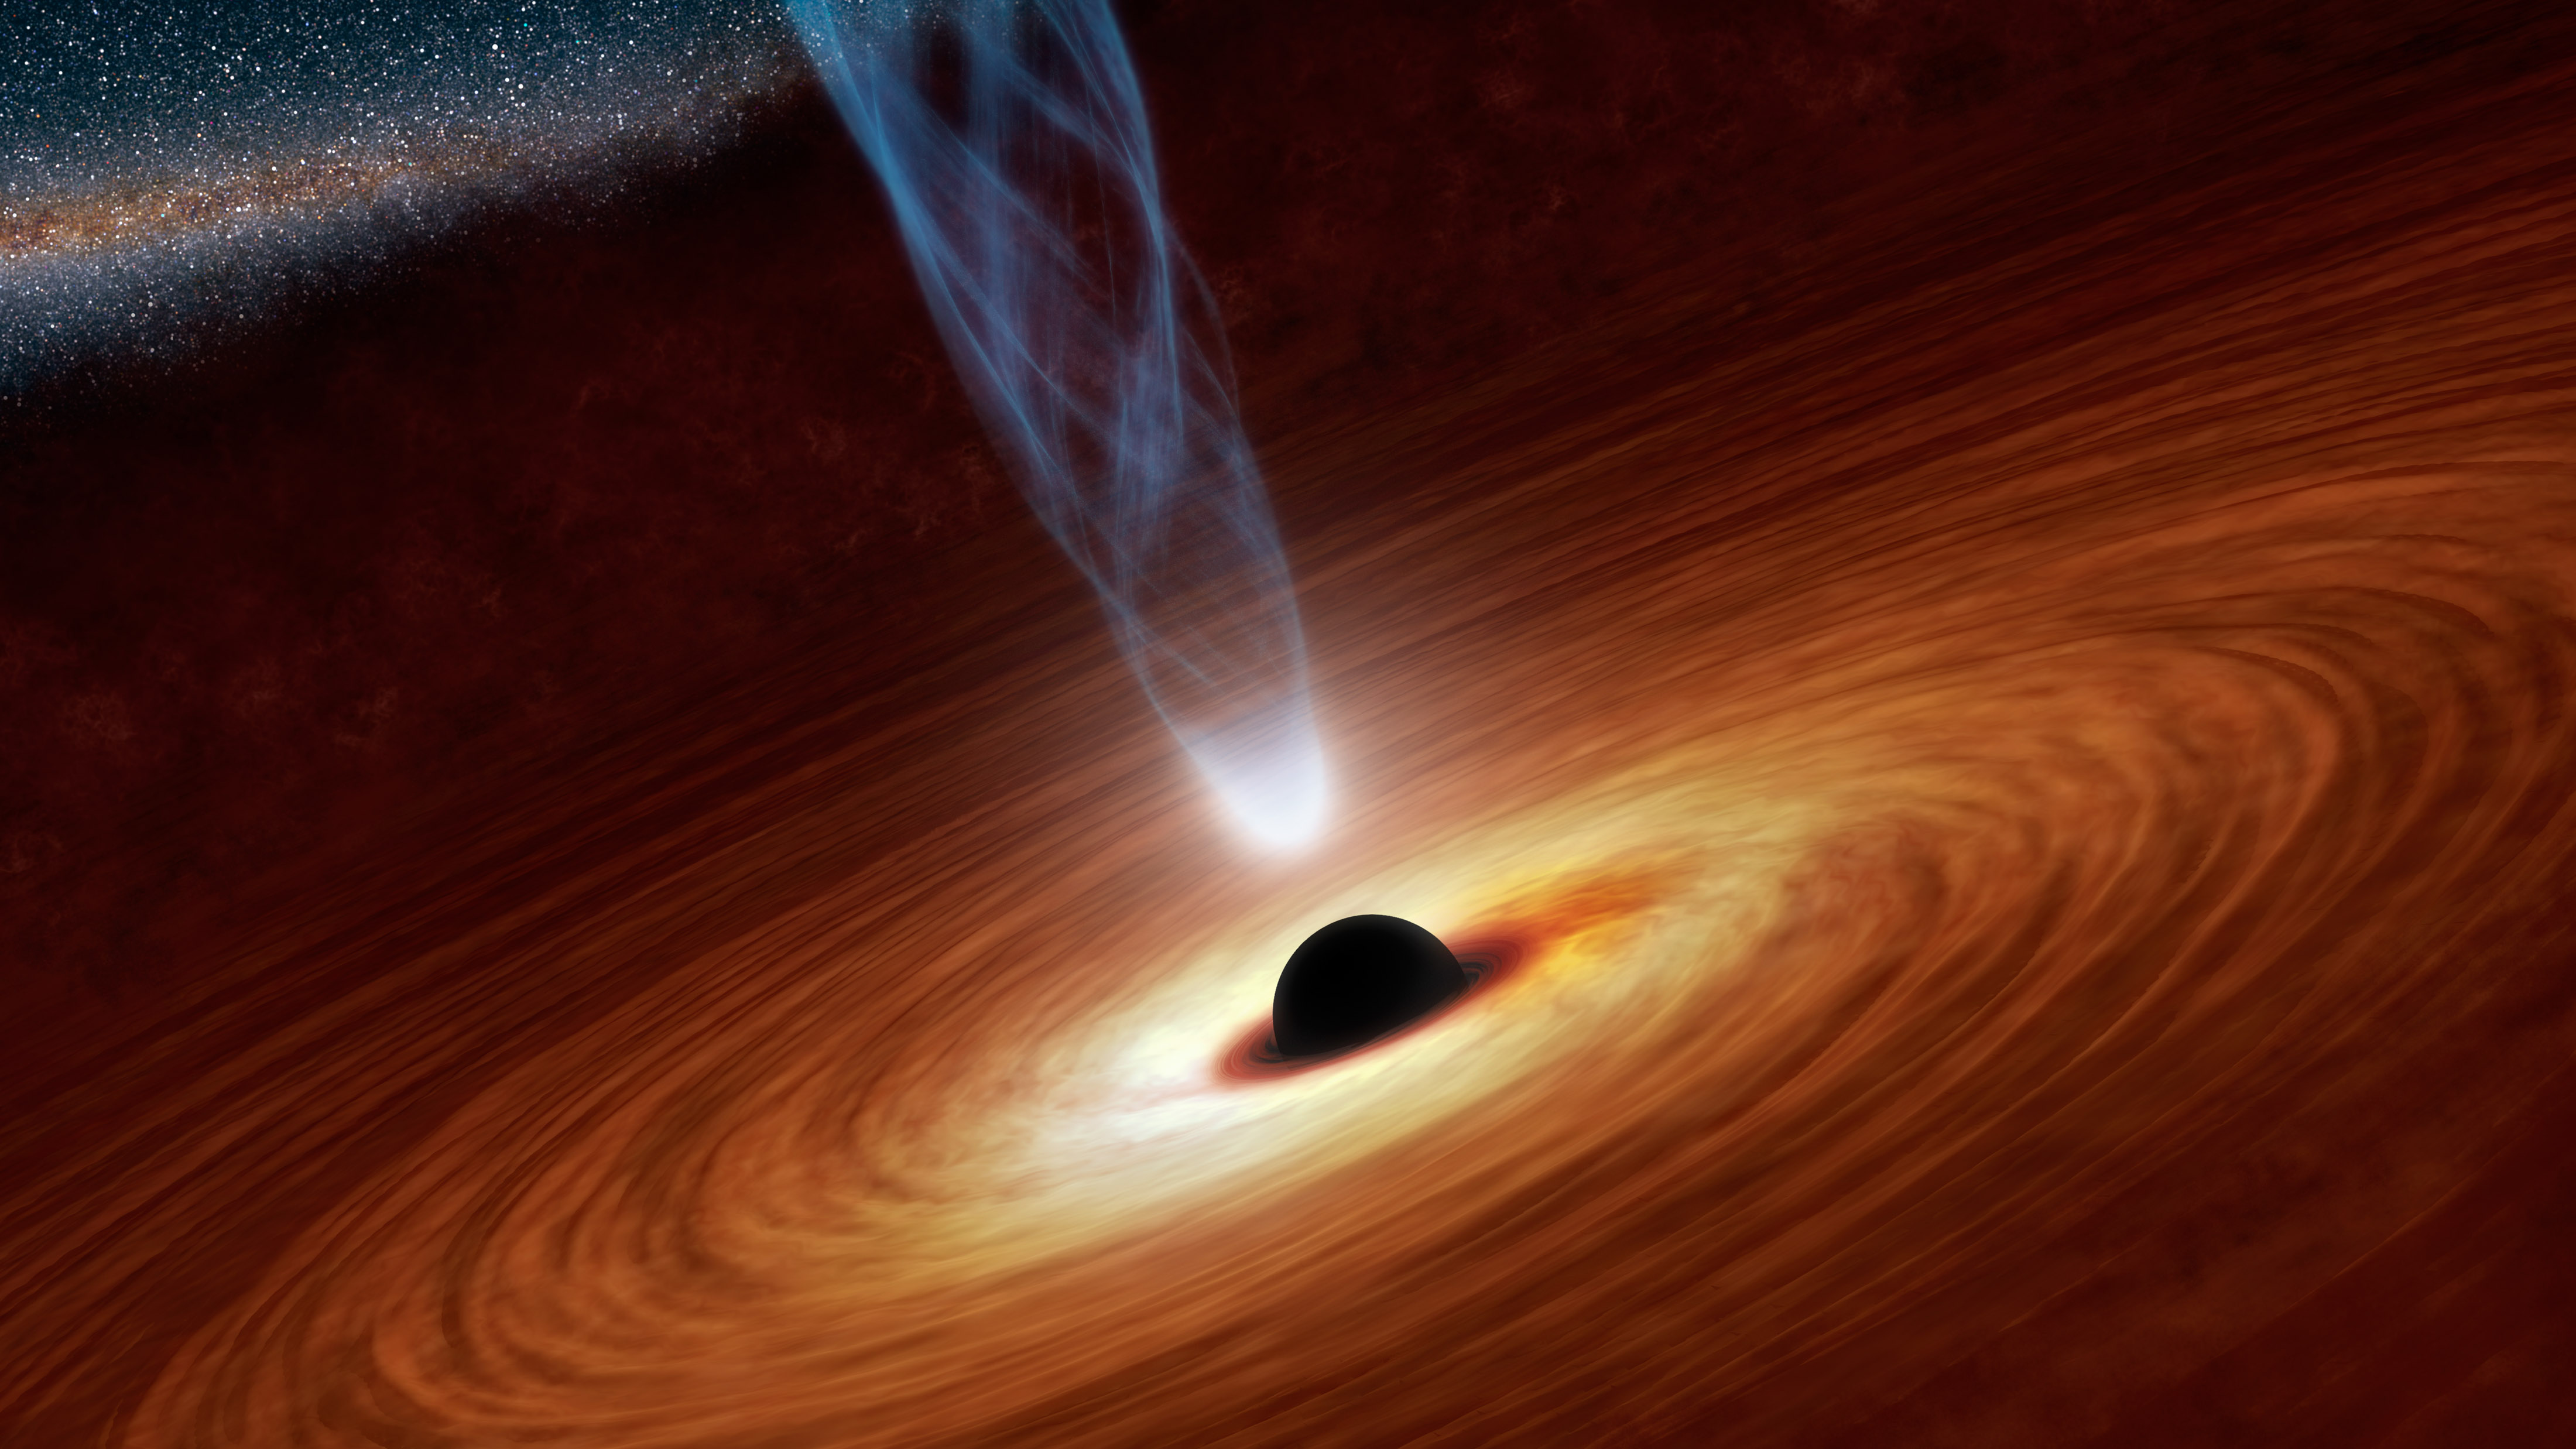 Giant black hole blasted out a jet of particles at 125 billion times the amount of energy the sun releases per year, confirms new study